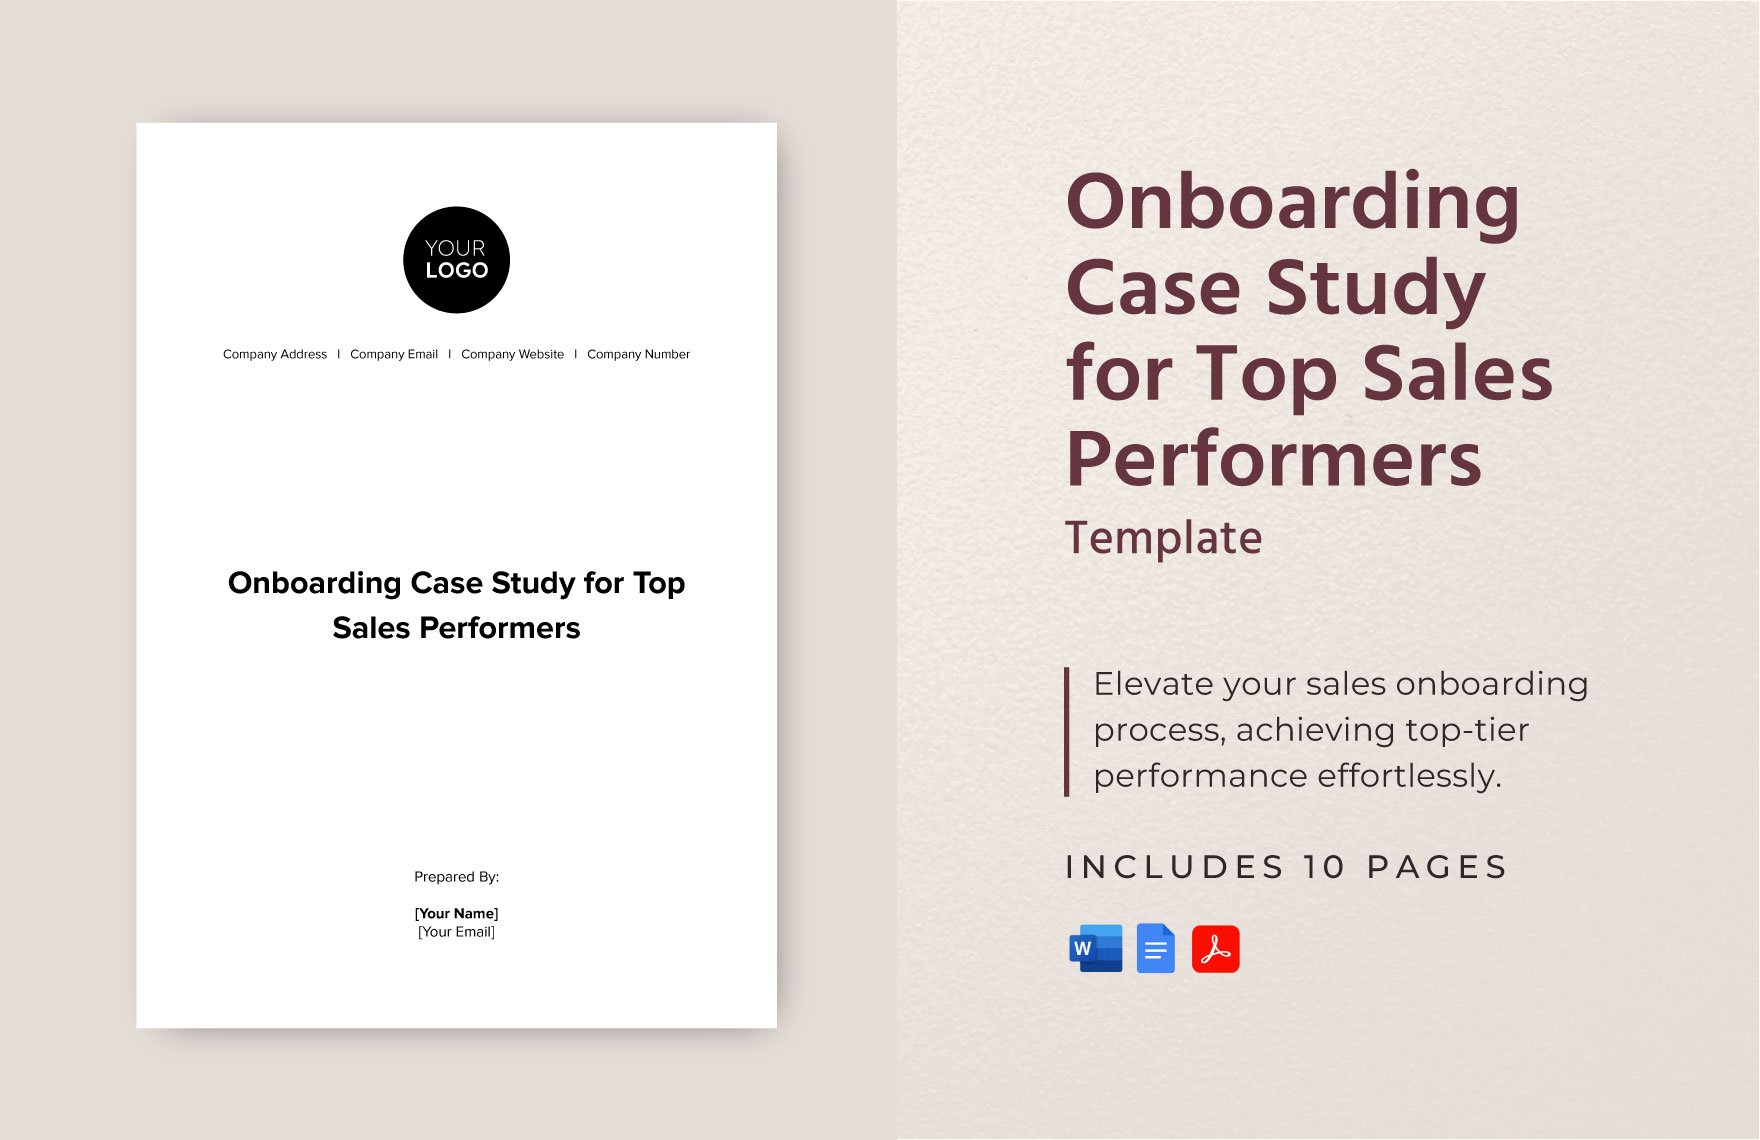 Onboarding Case Study for Top Sales Performers Template in Word, Google Docs, PDF